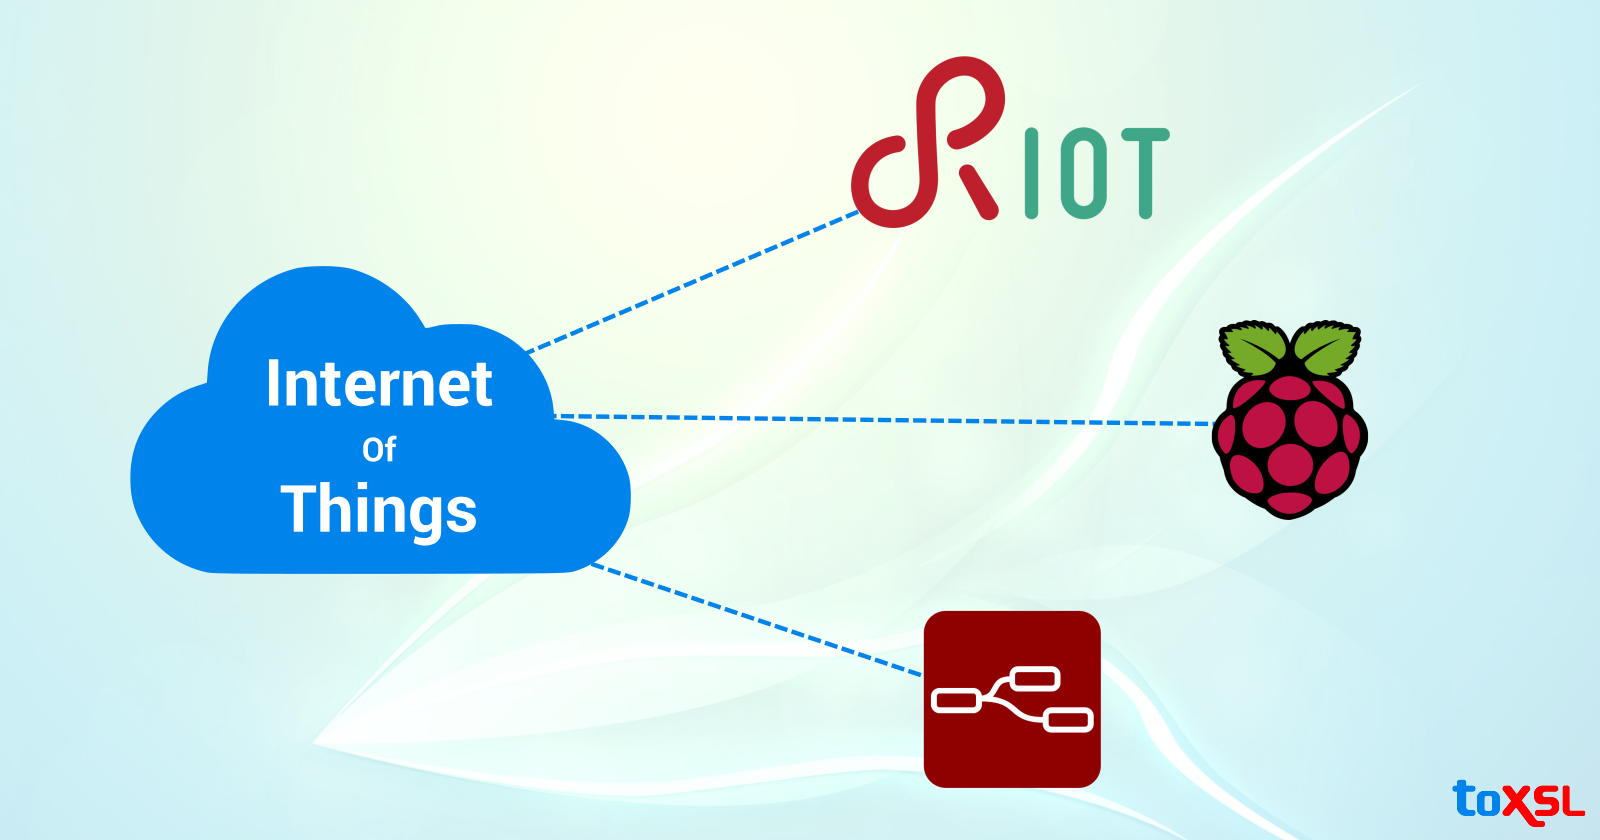 Reliable Open Source Platforms for IoT